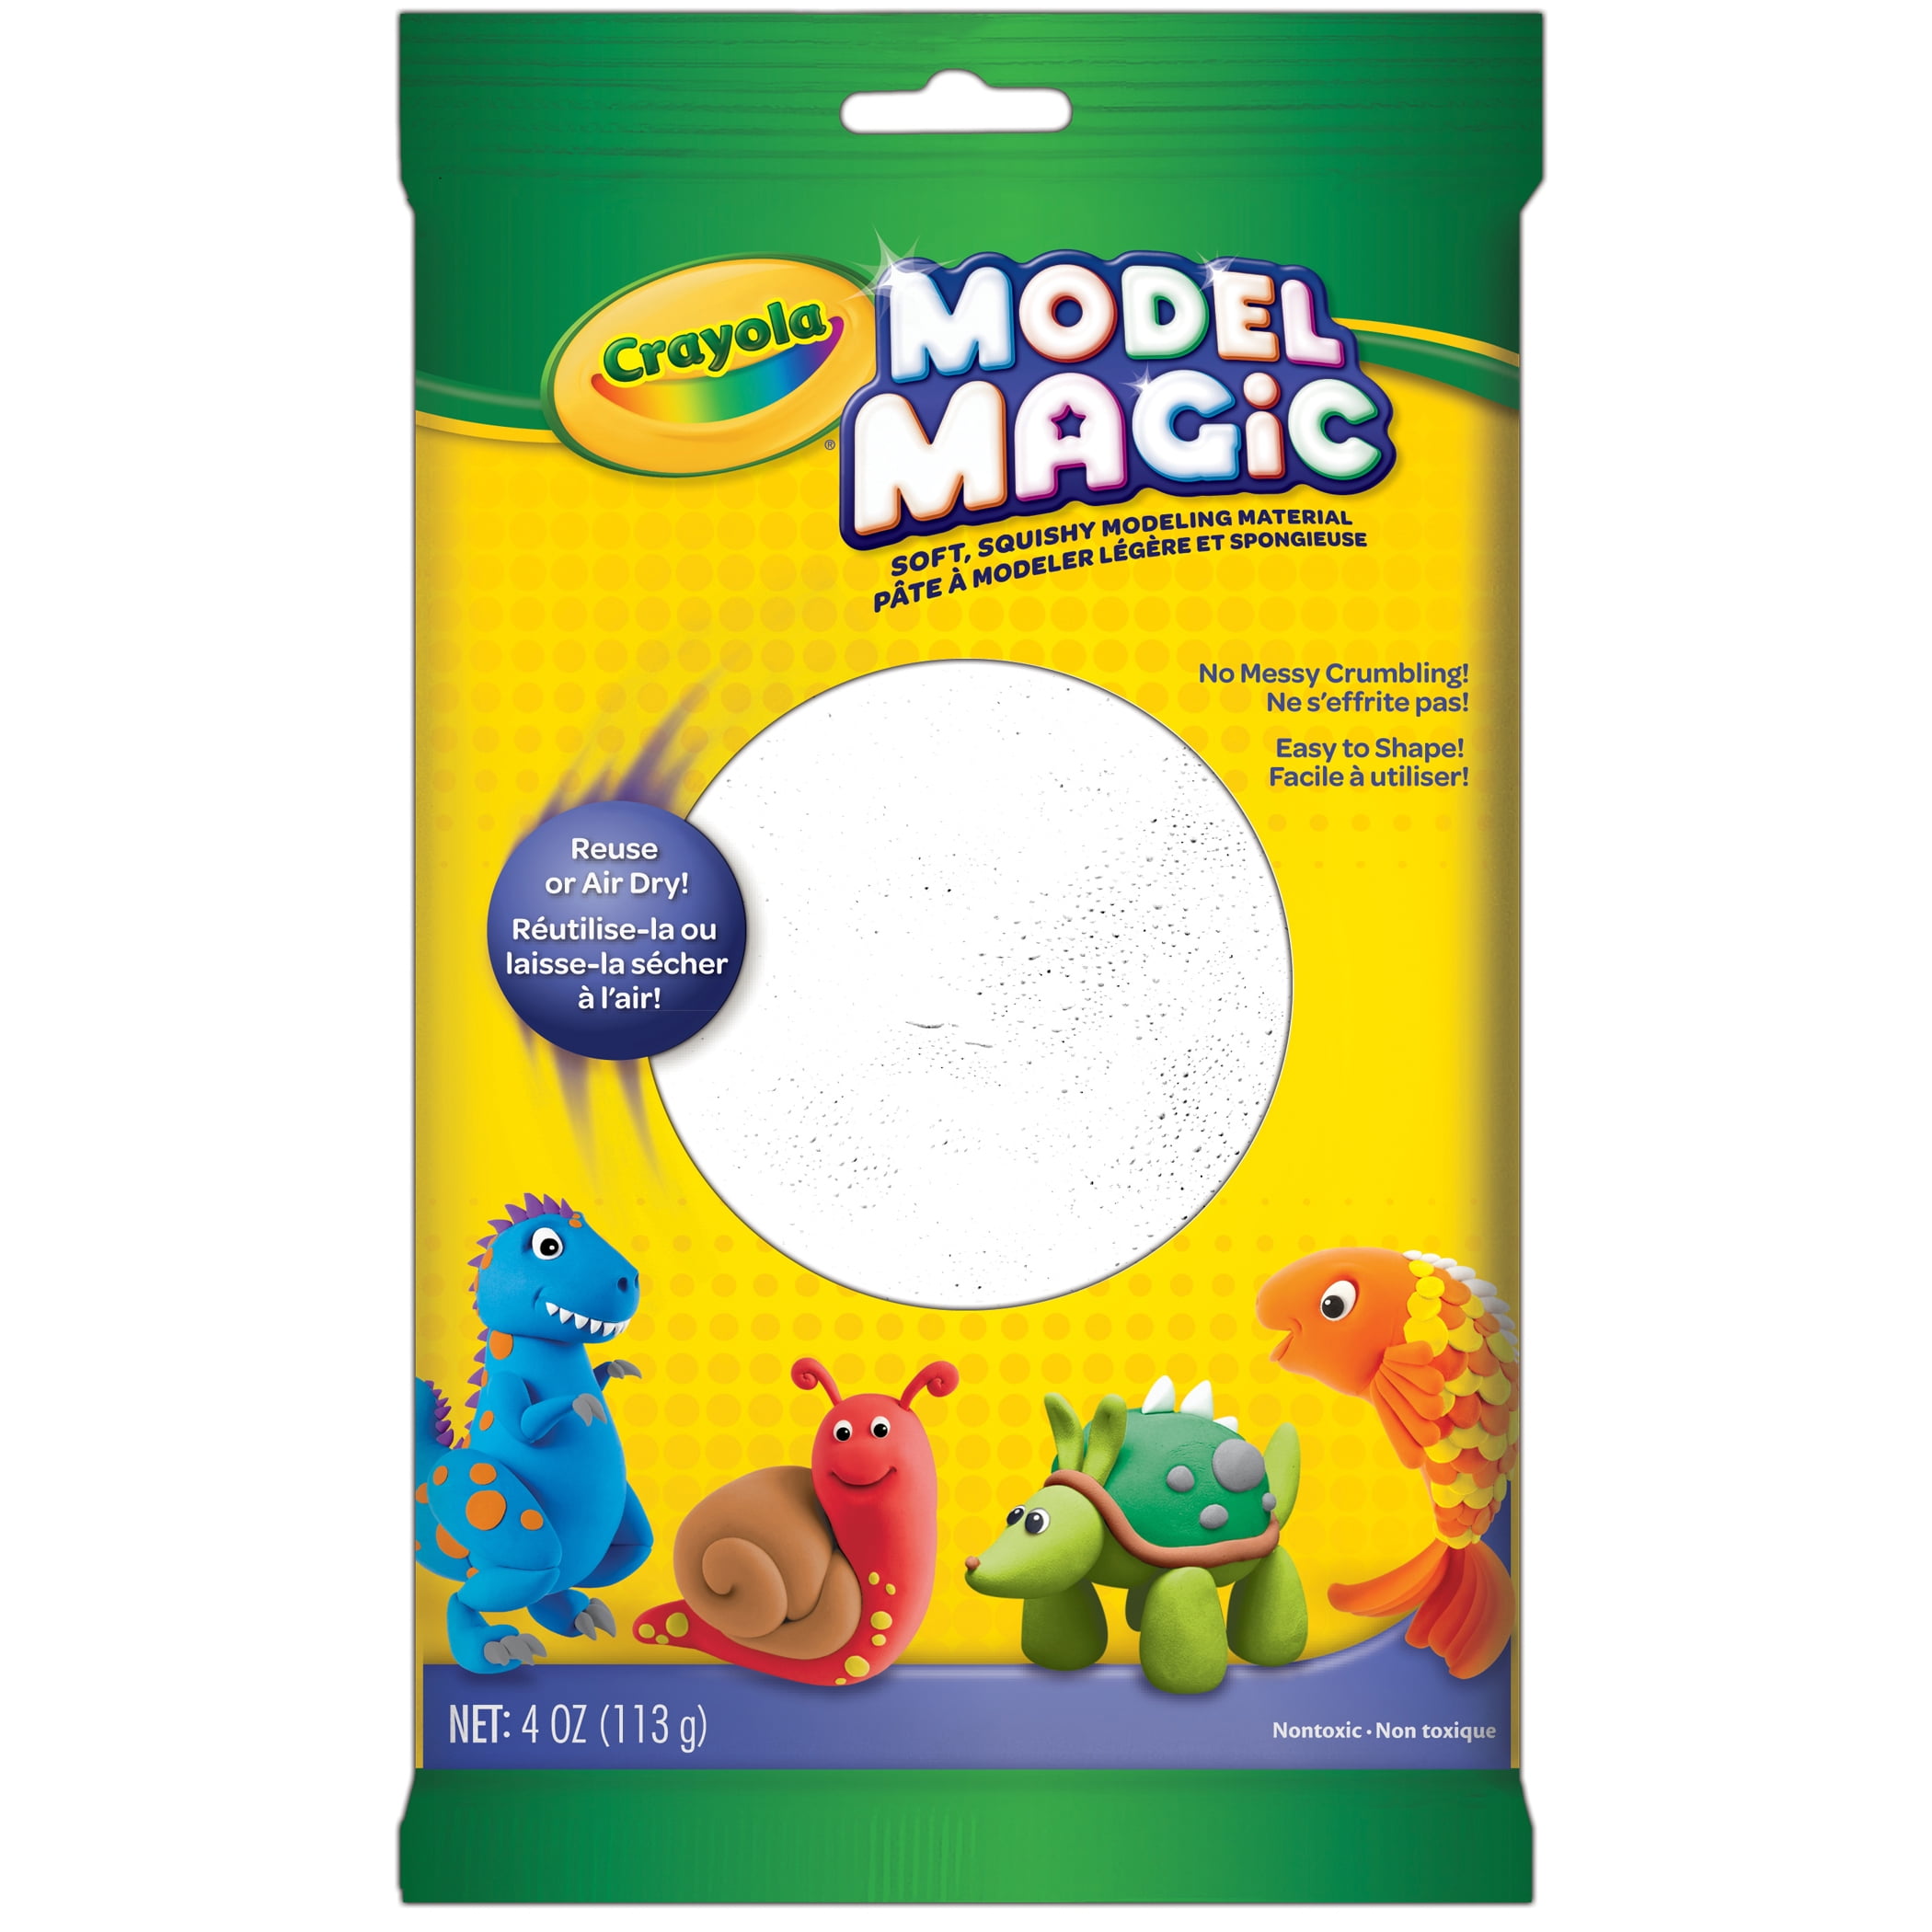 Crayola Bs232403 Model Magic Deluxe Variety Pack 14 Piece for sale online 